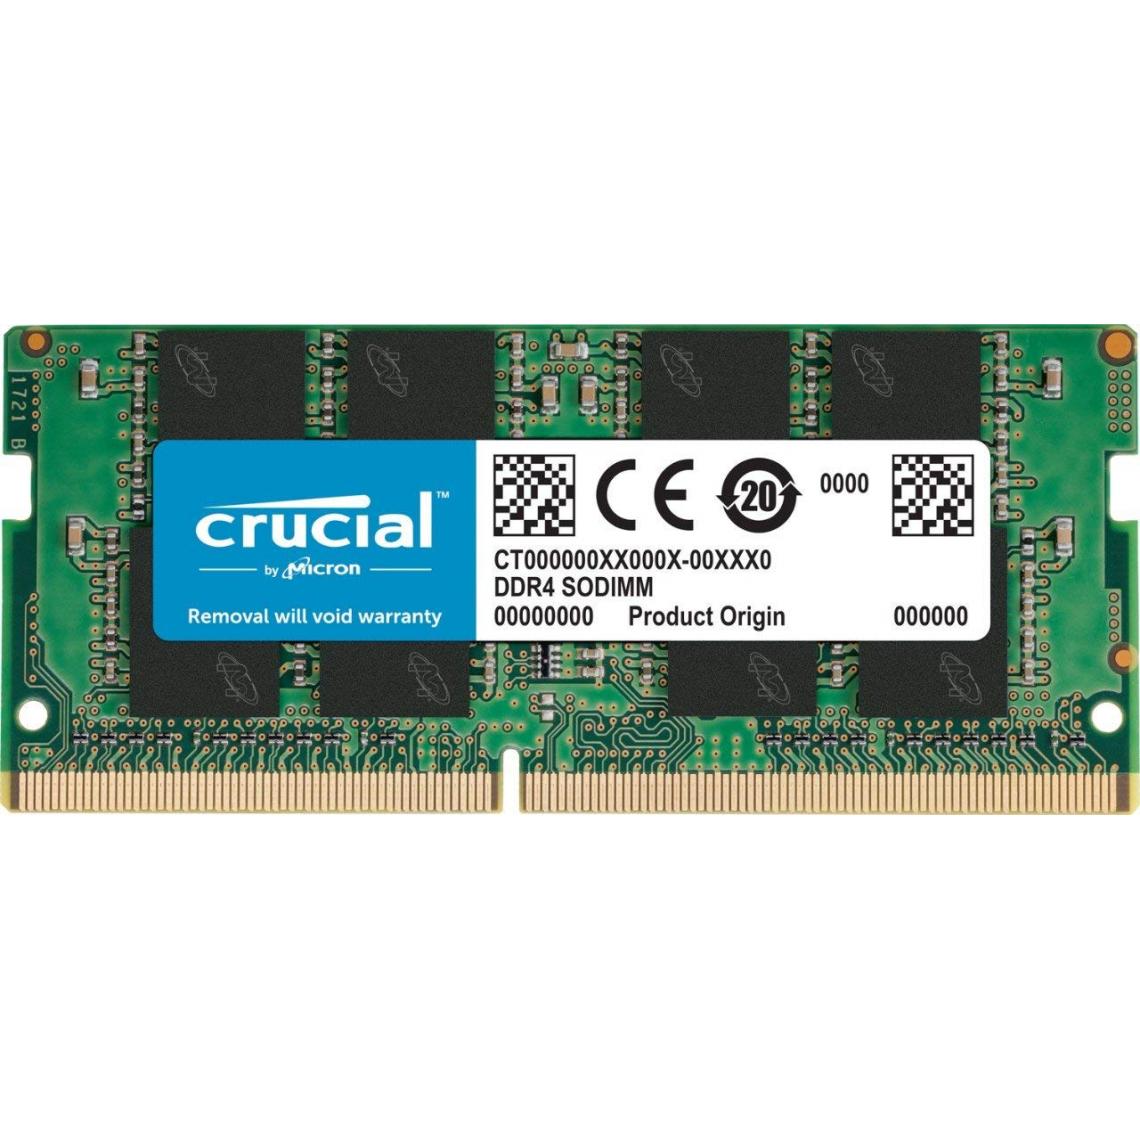 Eurovideo Vg - Crucial 32GB DDR4 3200 MT/s SODIMM 260pin CL19 - RAM PC Fixe